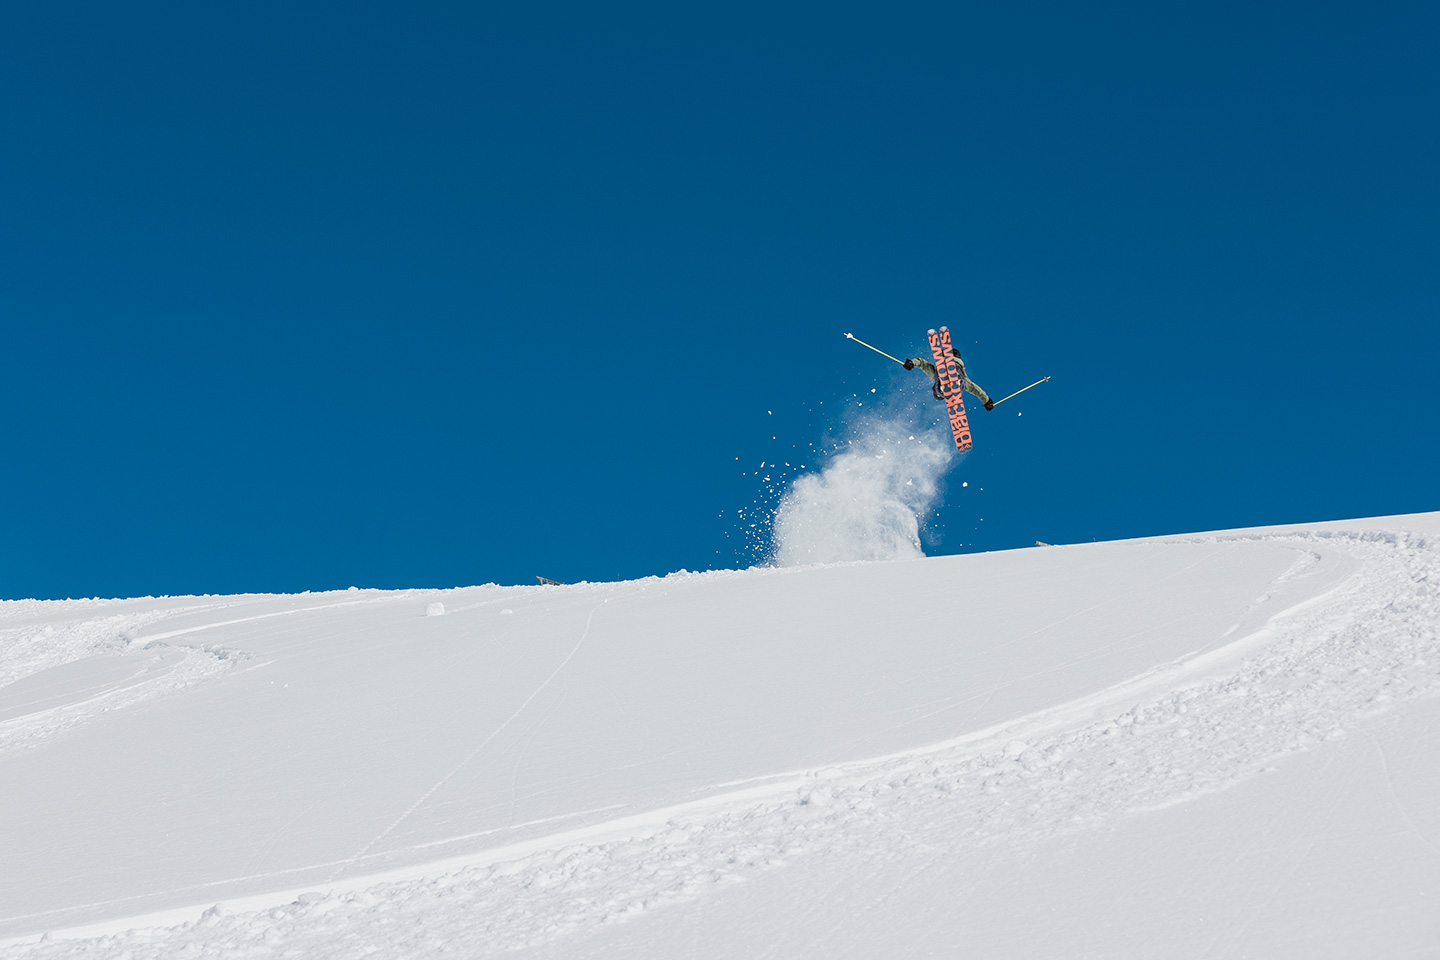 Remco with a large cork 360 on a pow day. 